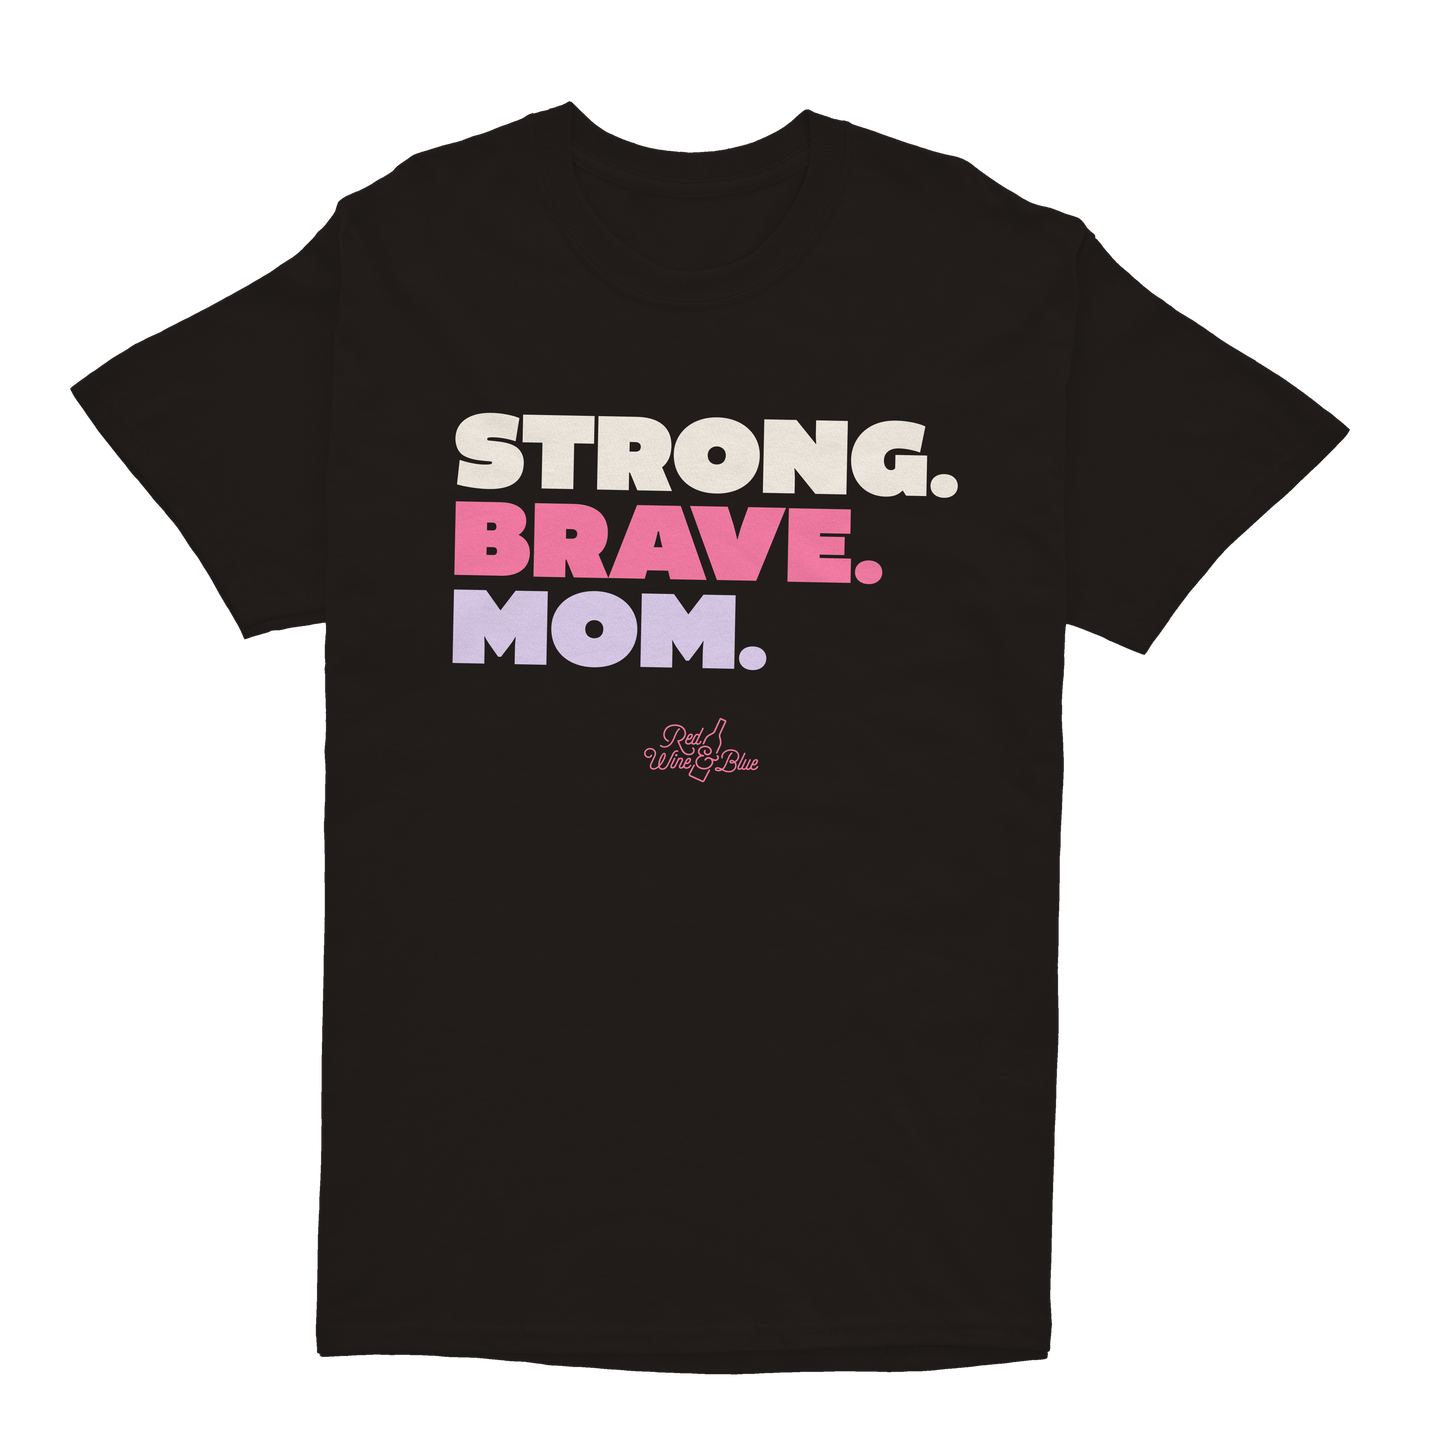 Strong. Brave. Mom. T-Shirt